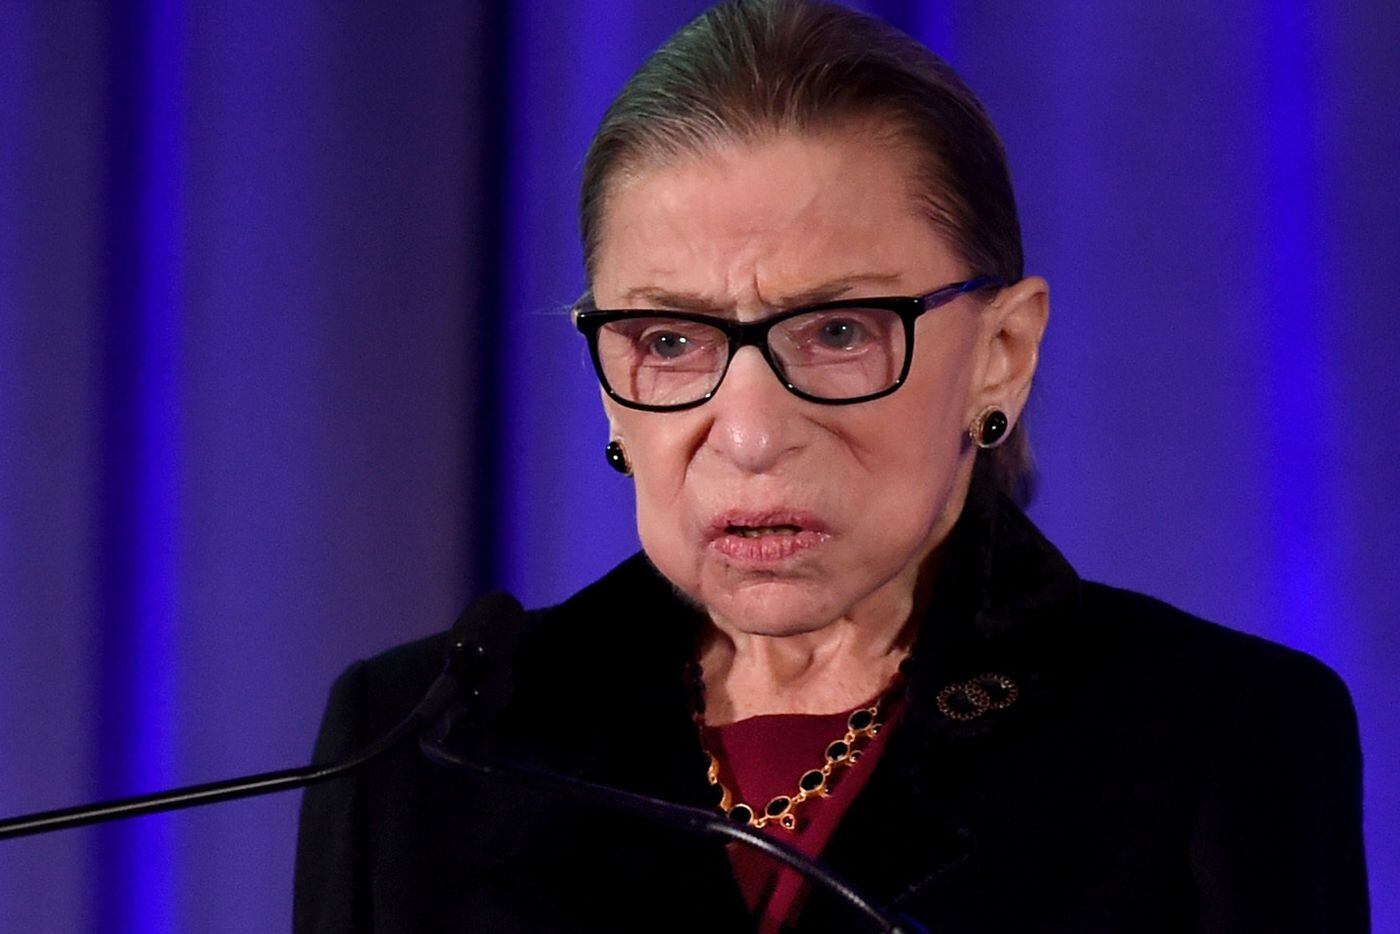 U.S. Supreme Court associate justice Ruth Bader Ginsburg speaks after she is inducted into the National Museum of American Jewish History's Only in America Gallery Dec. 19, 2019.